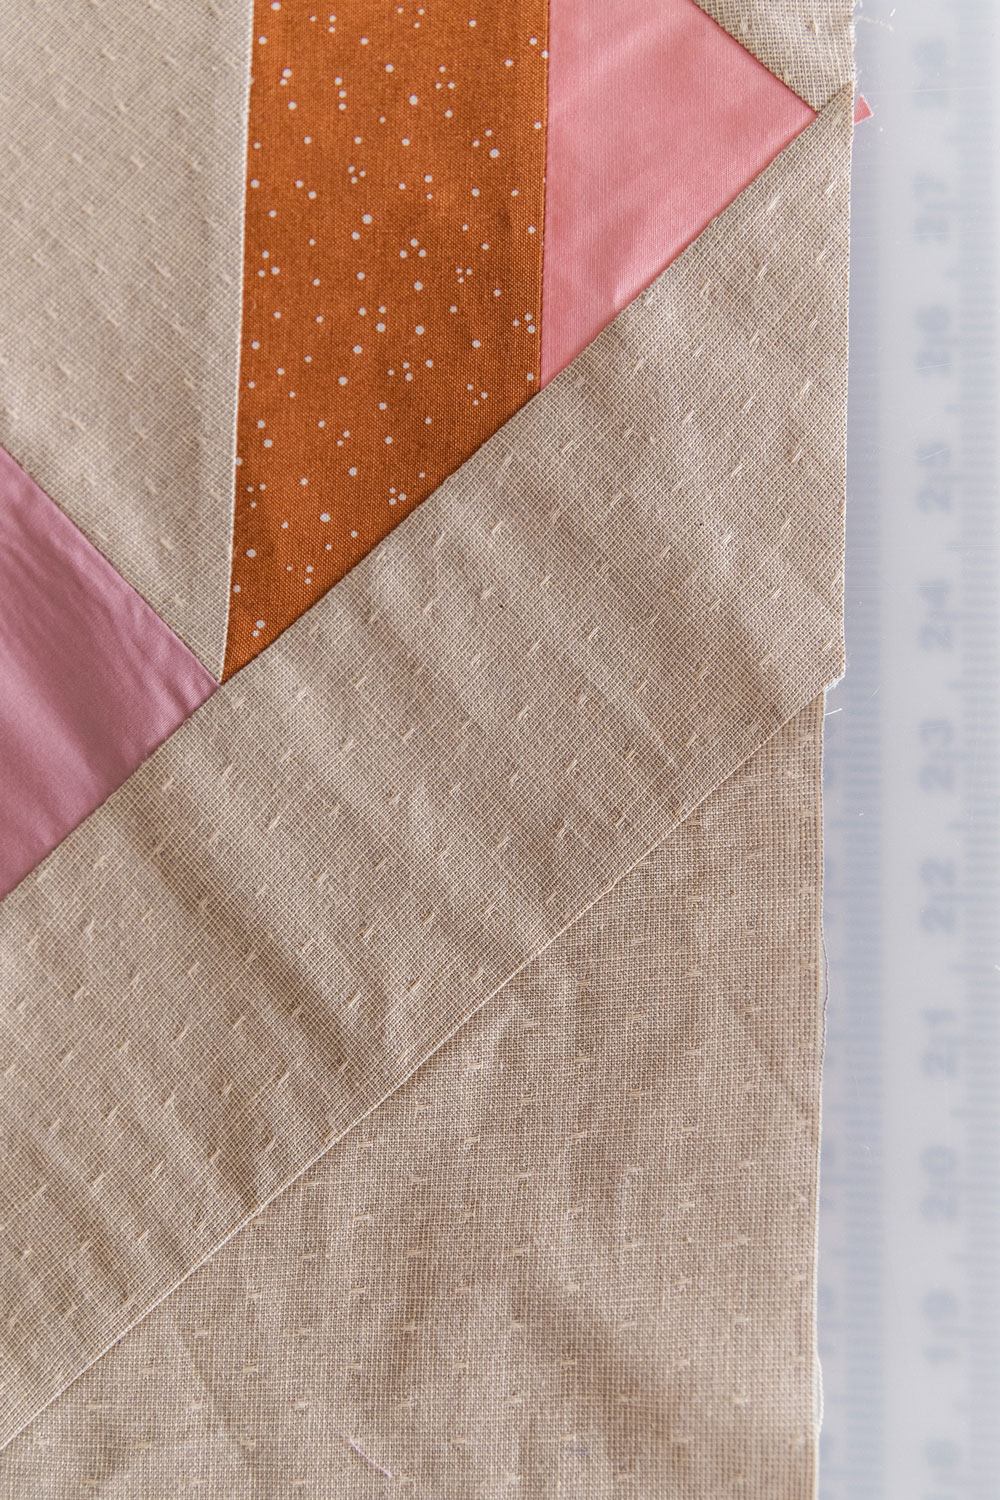 The New Horizons quilt along includes lots of extra instruction and tips in sewing this fat quarter friendly modern throw quilt. suzyquilts.com #quilt #modernquilt